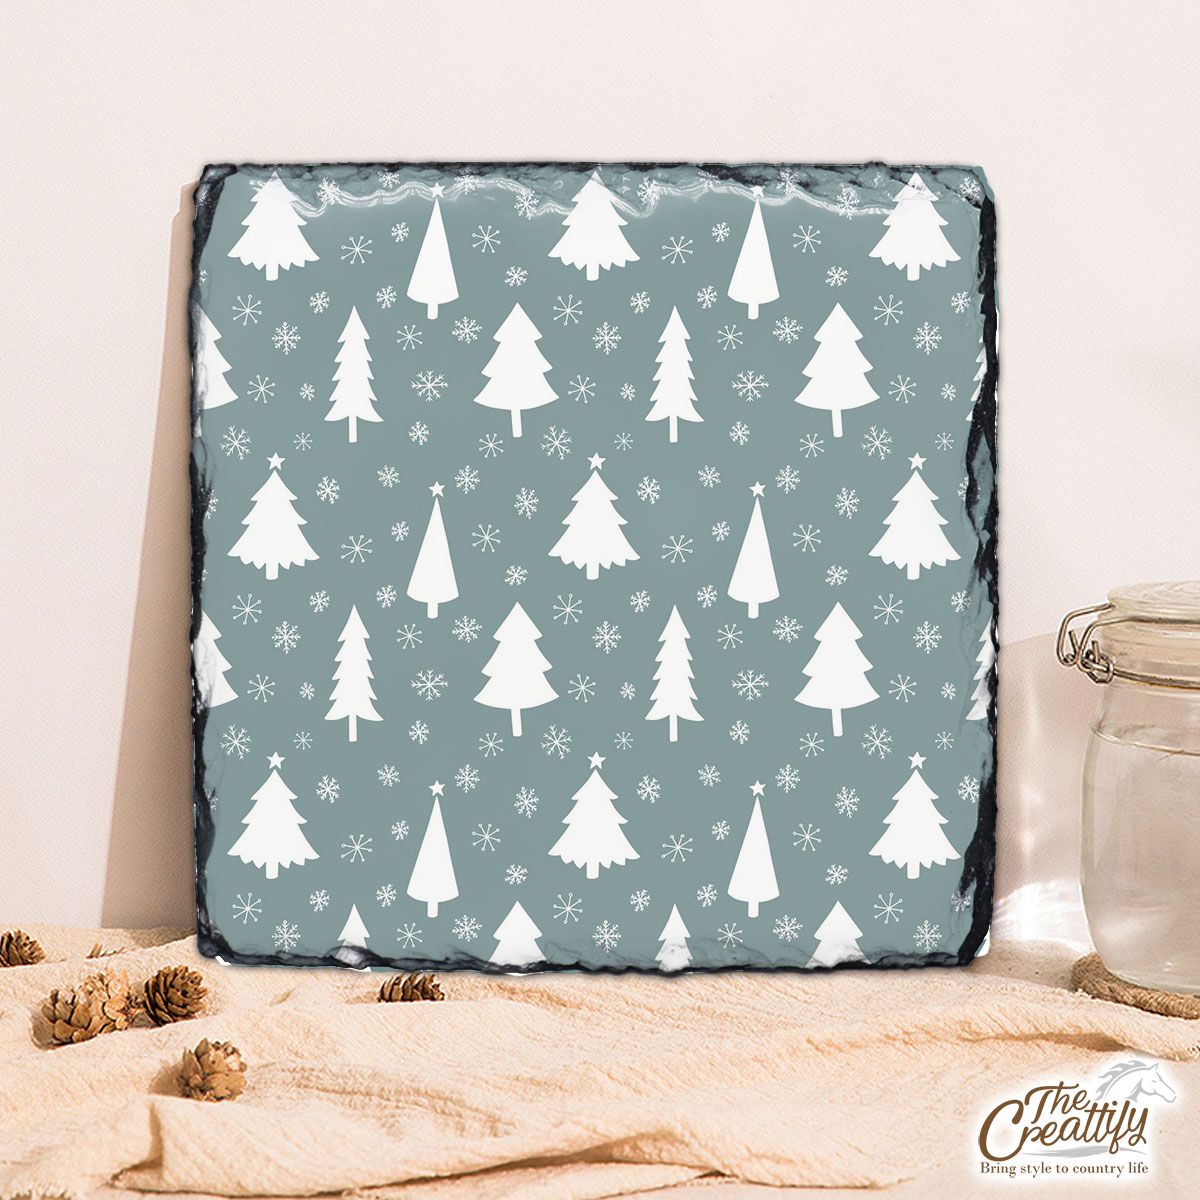 Pine Tree Sillhouette And Snowflake Seamless Pattern Square Lithograph